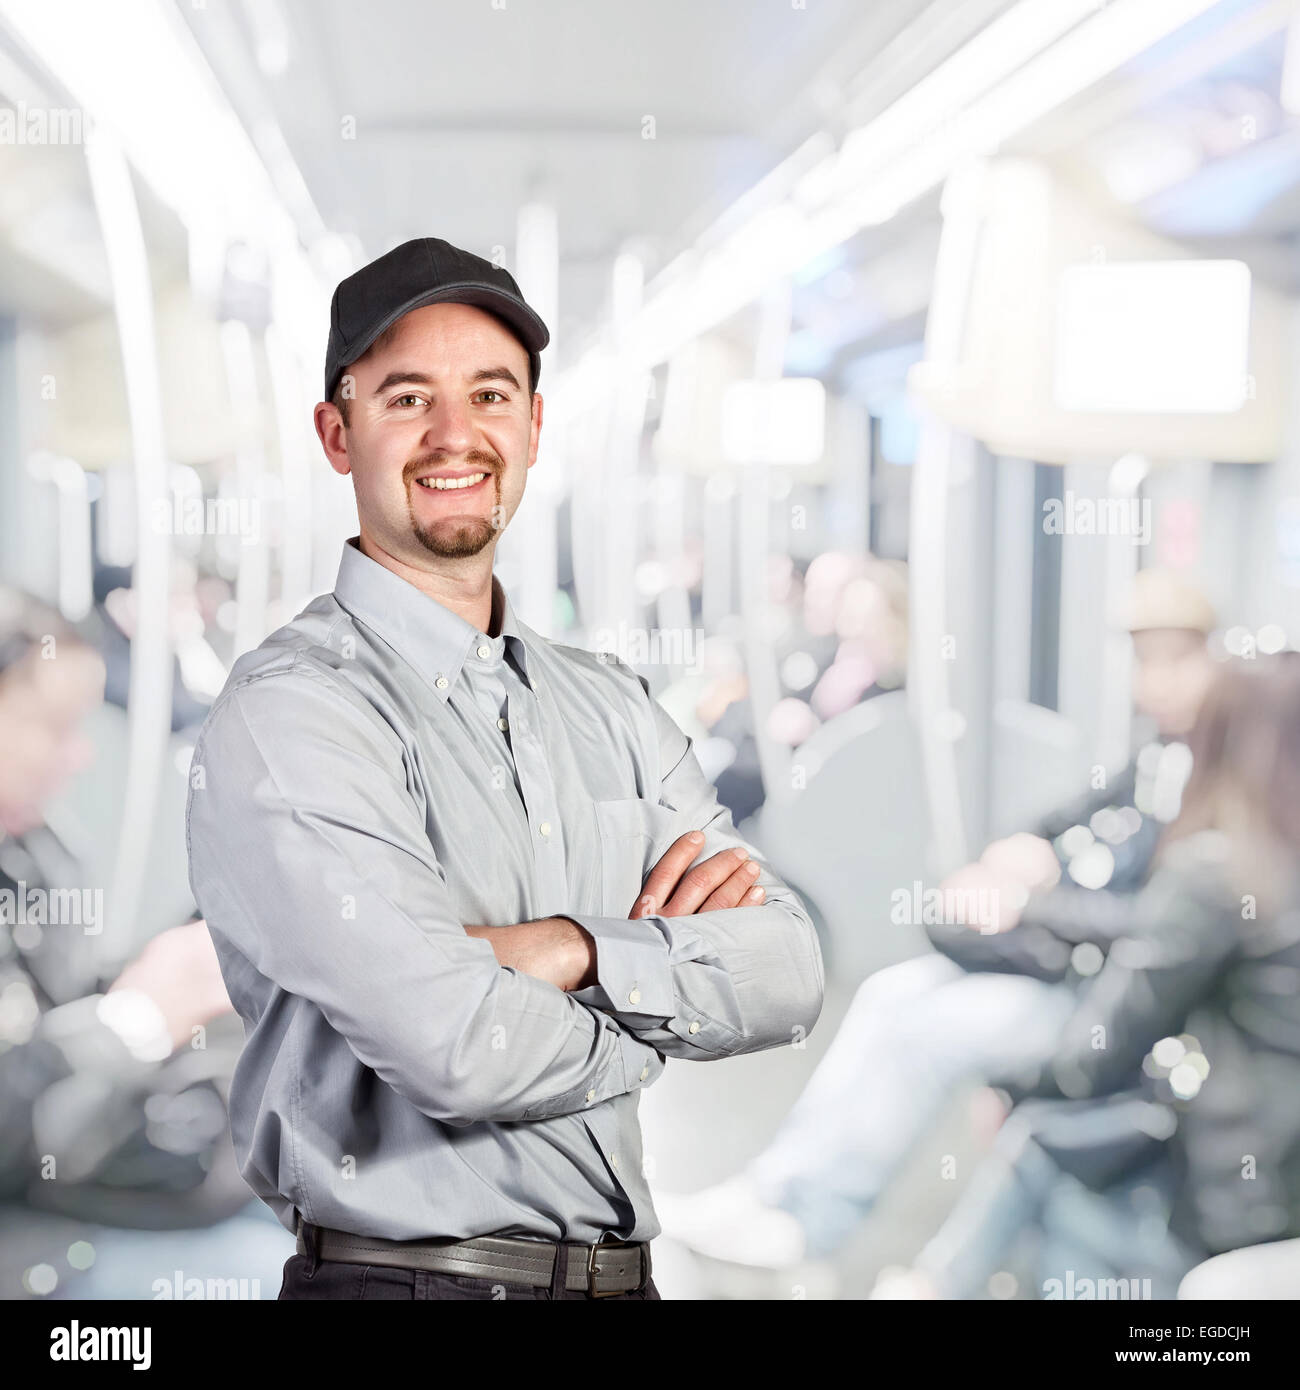 smiling worker in uniform on train Stock Photo